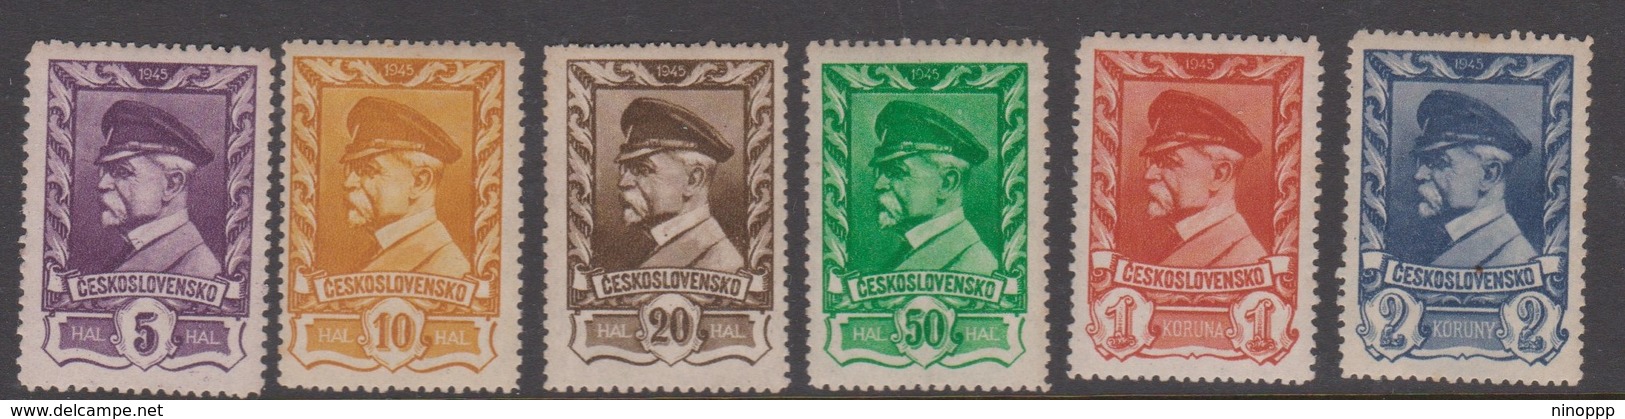 Czechoslovakia Scott 262A-265 1945-46 Masaryk, Mint Never Hinged - Unused Stamps